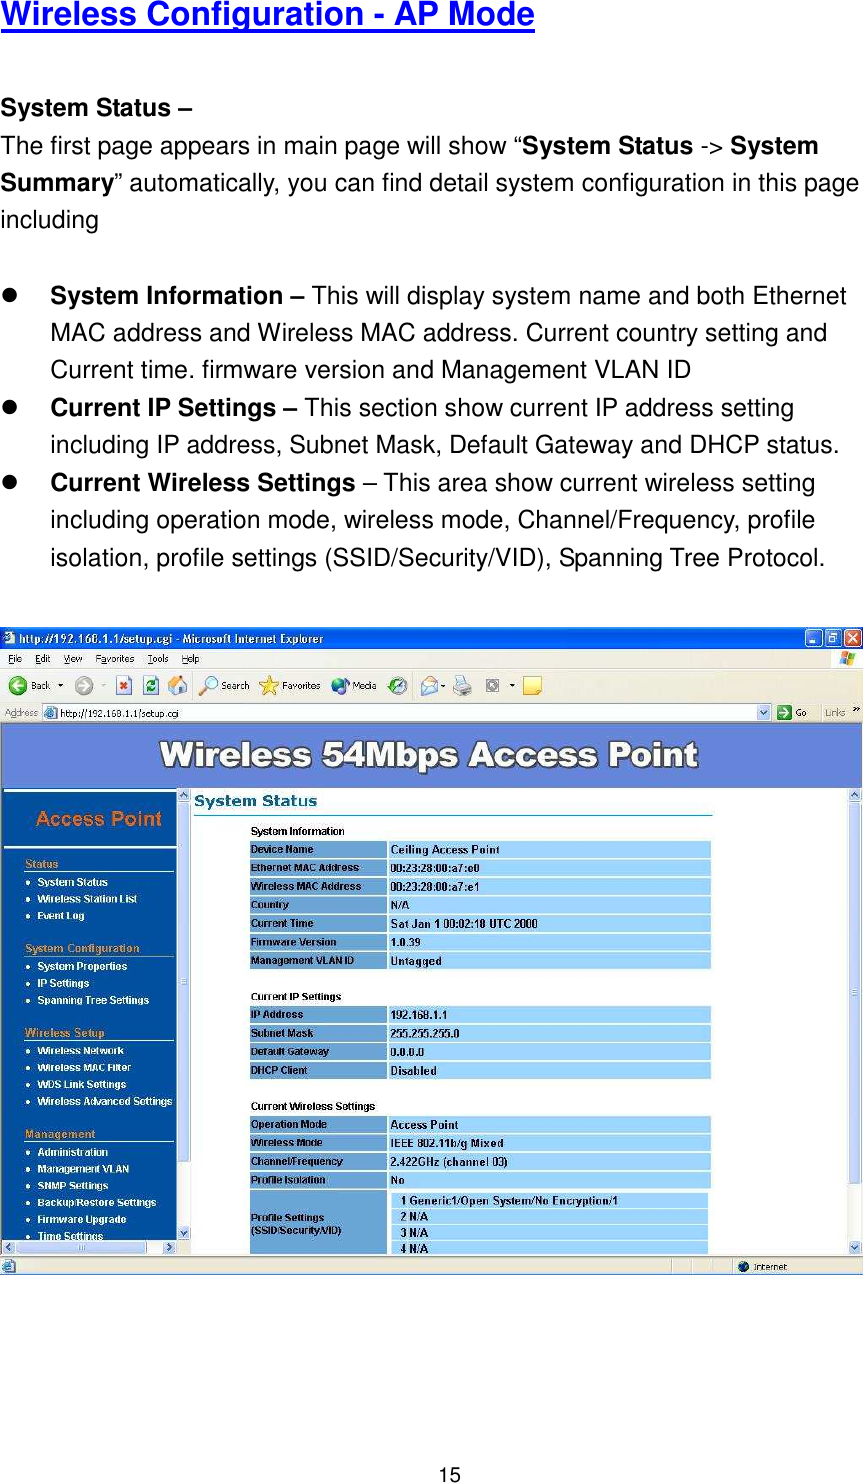  15 Wireless Configuration - AP Mode  System Status –   The first page appears in main page will show “System Status -&gt; System Summary” automatically, you can find detail system configuration in this page including     System Information – This will display system name and both Ethernet MAC address and Wireless MAC address. Current country setting and Current time. firmware version and Management VLAN ID  Current IP Settings – This section show current IP address setting including IP address, Subnet Mask, Default Gateway and DHCP status.  Current Wireless Settings – This area show current wireless setting including operation mode, wireless mode, Channel/Frequency, profile isolation, profile settings (SSID/Security/VID), Spanning Tree Protocol.     